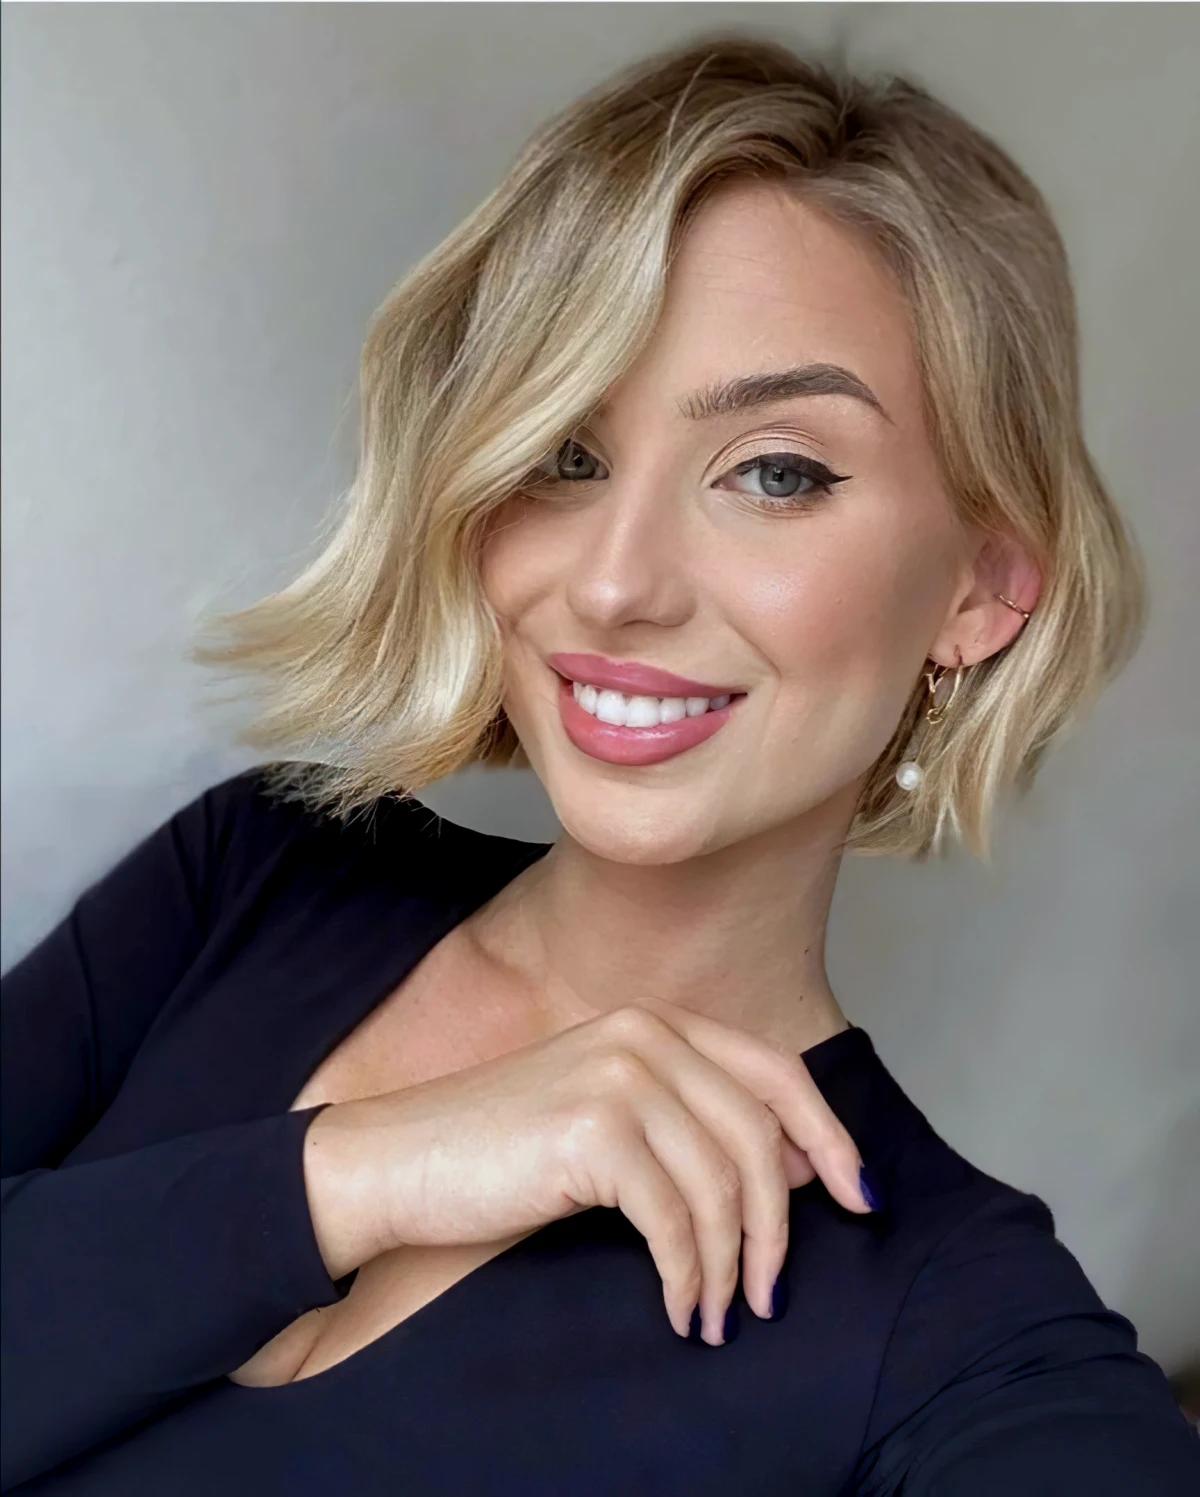 coupe carre degradee tres court femme blonde souriante